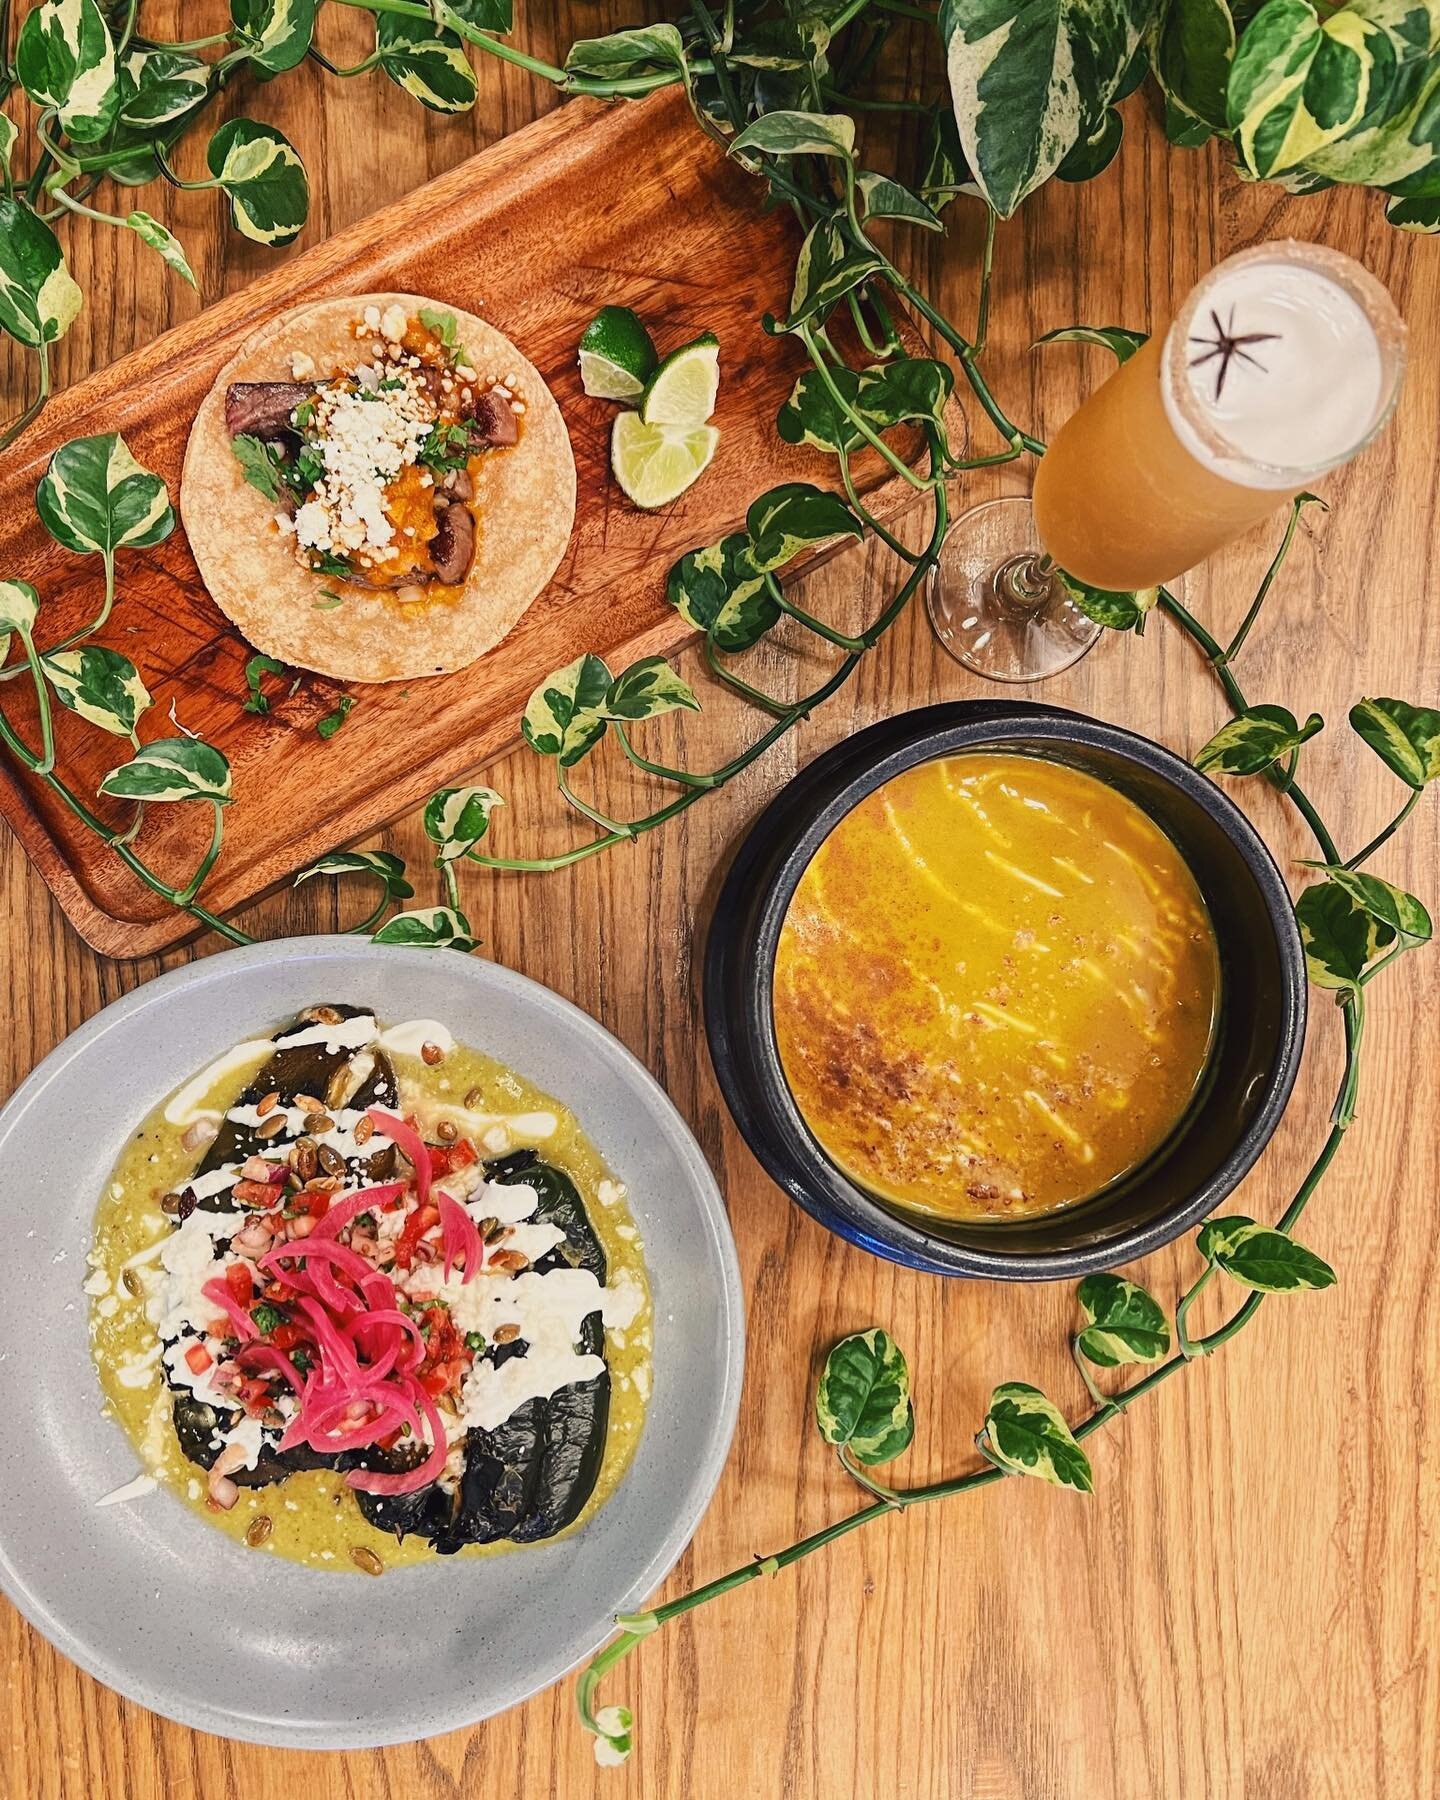 We say shop AND sip your way through Small biz S A T U R D A Y 🛍 🍹🥂

Weekend specials in full swing::
Carne asada taco, Chile rellenos, sopa de calabaza, sidra-mosas + guava Margs 🤌🏽

See you soon, and visit some of our neighbors while you&rsquo